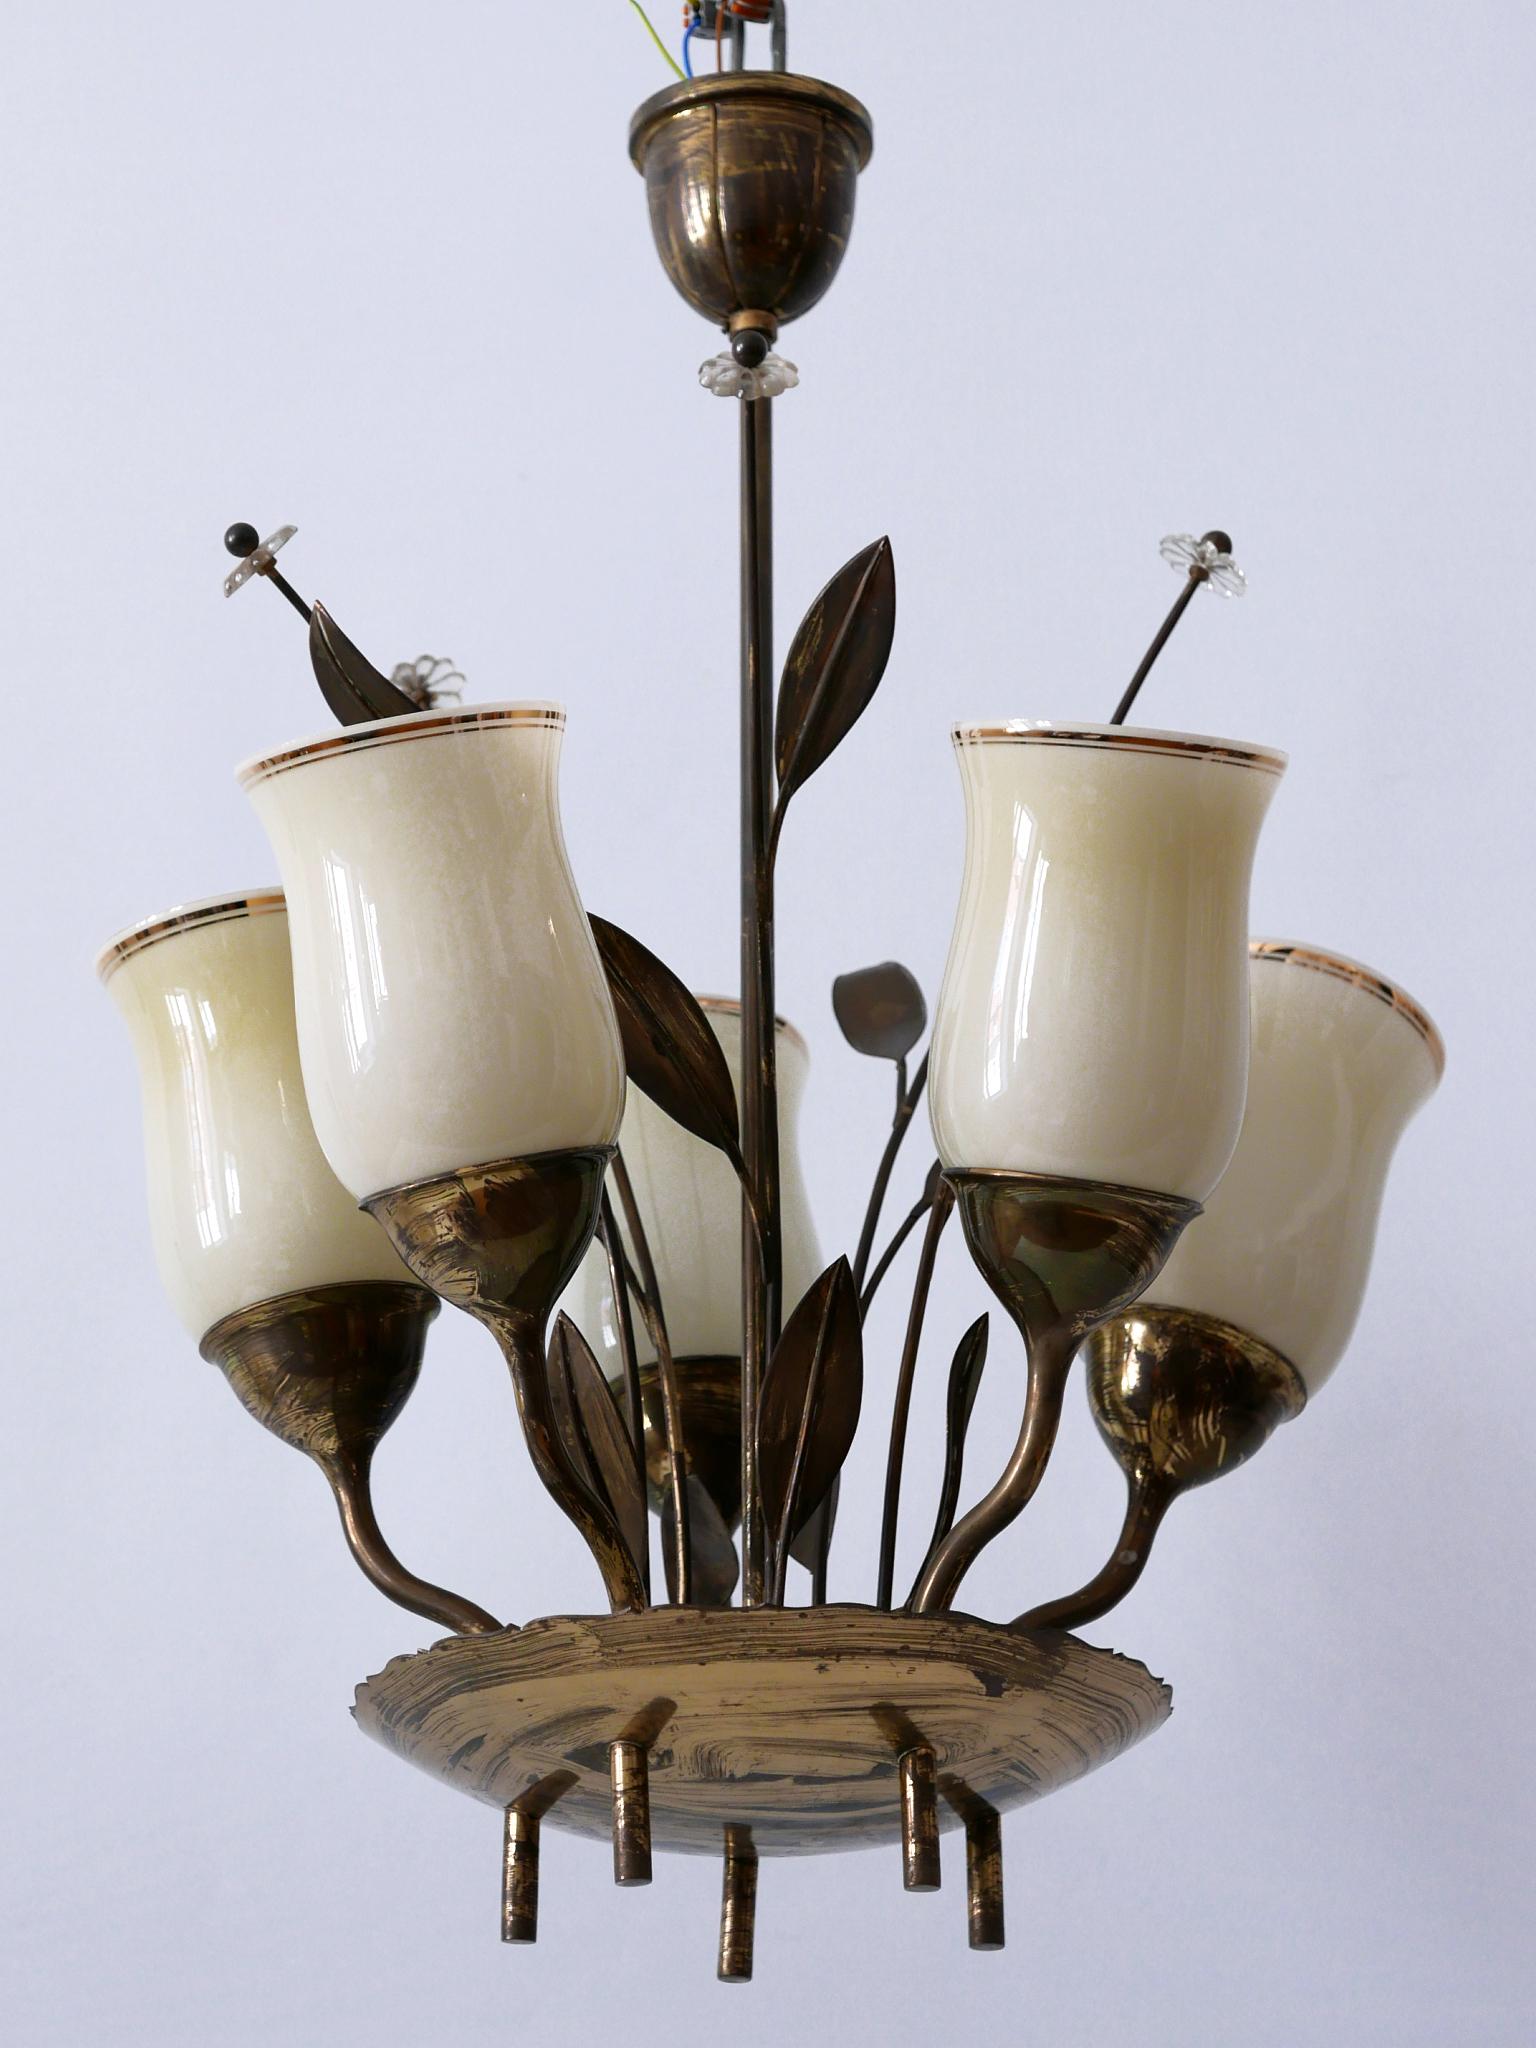 Exceptional Scandinavian Brass & Opal Glass Chandelier or Ceiling Lamp, 1950s For Sale 2